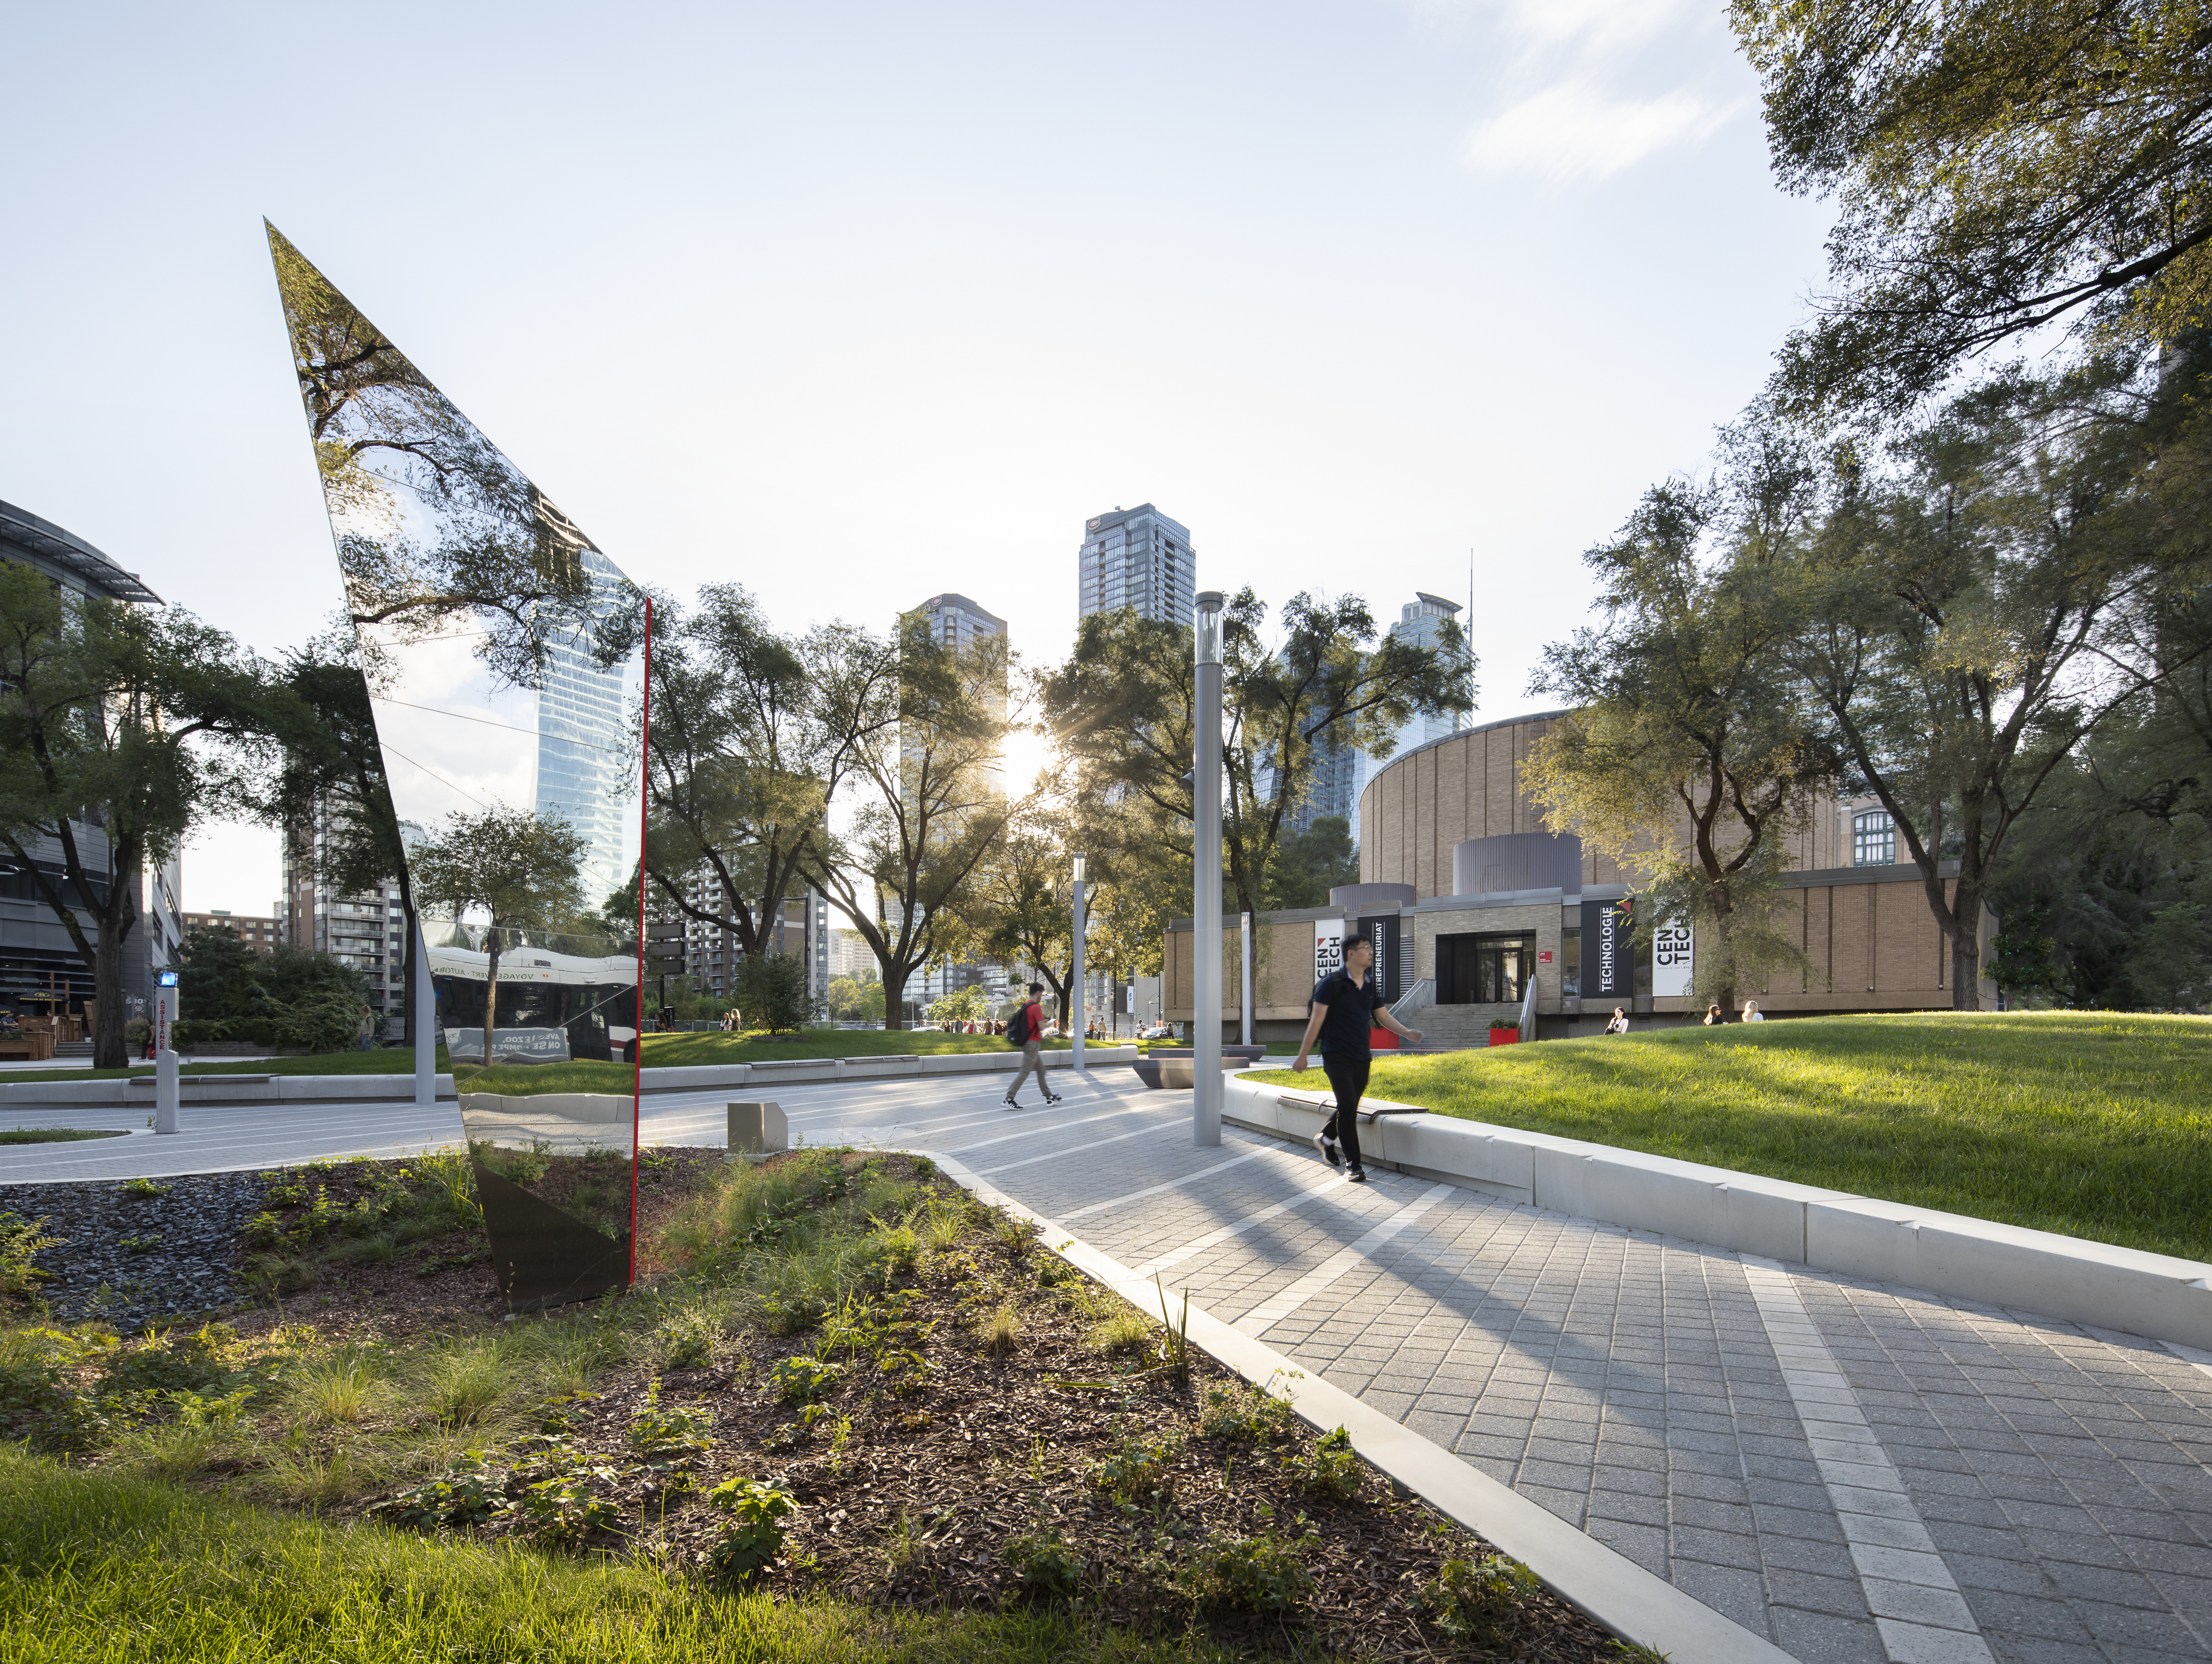 Modern campus with students, green spaces, and innovative architecture.